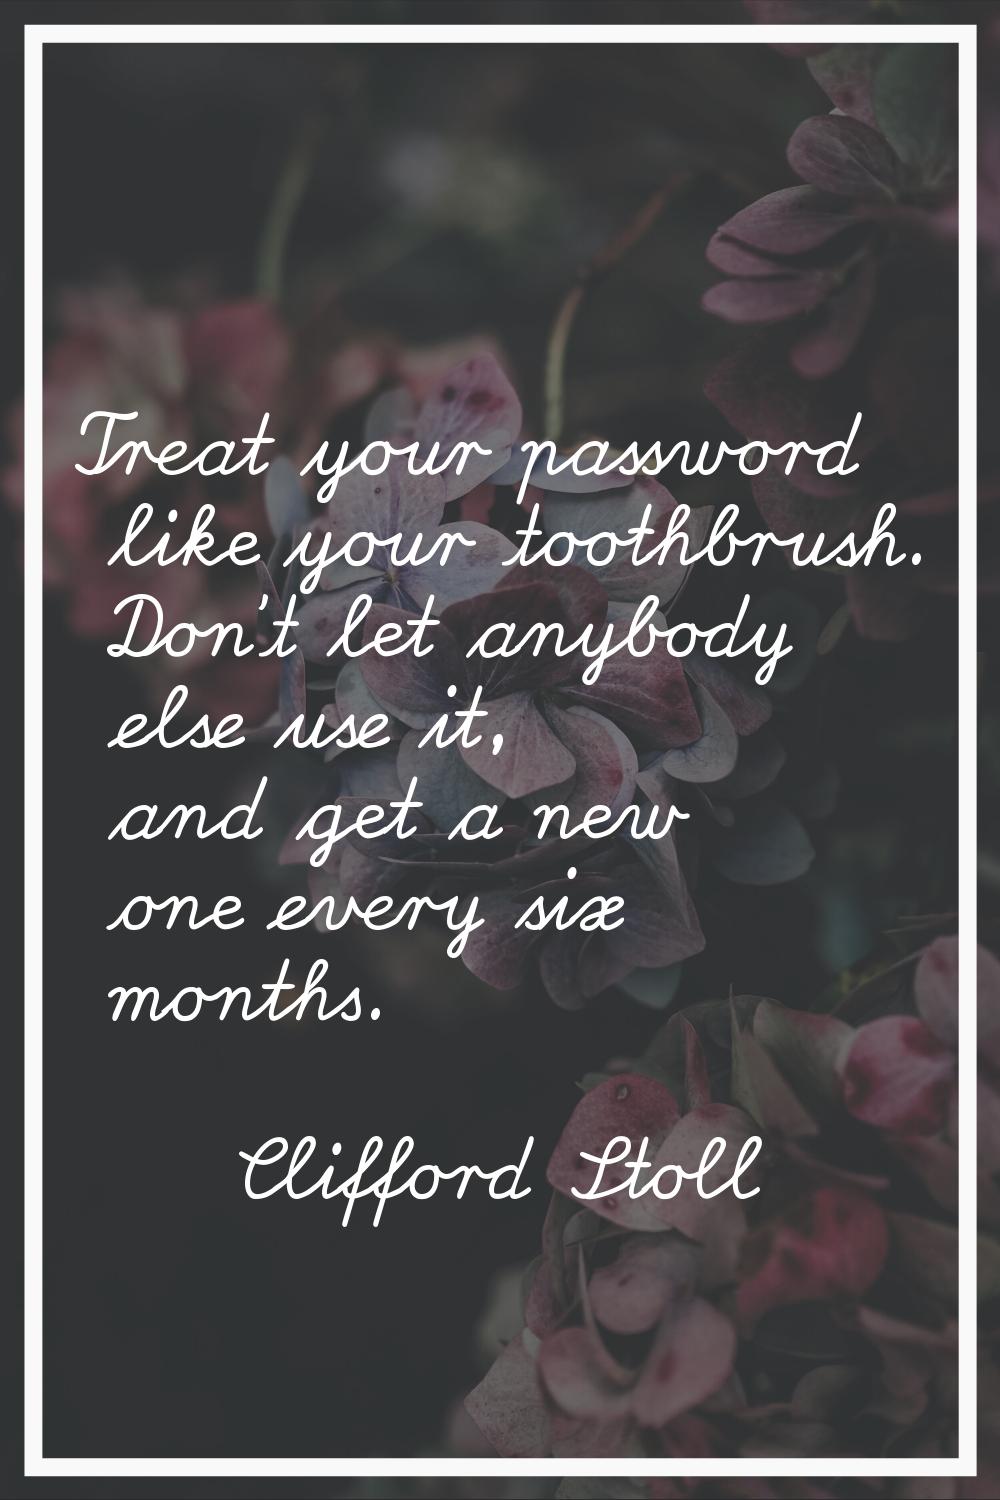 Treat your password like your toothbrush. Don't let anybody else use it, and get a new one every si